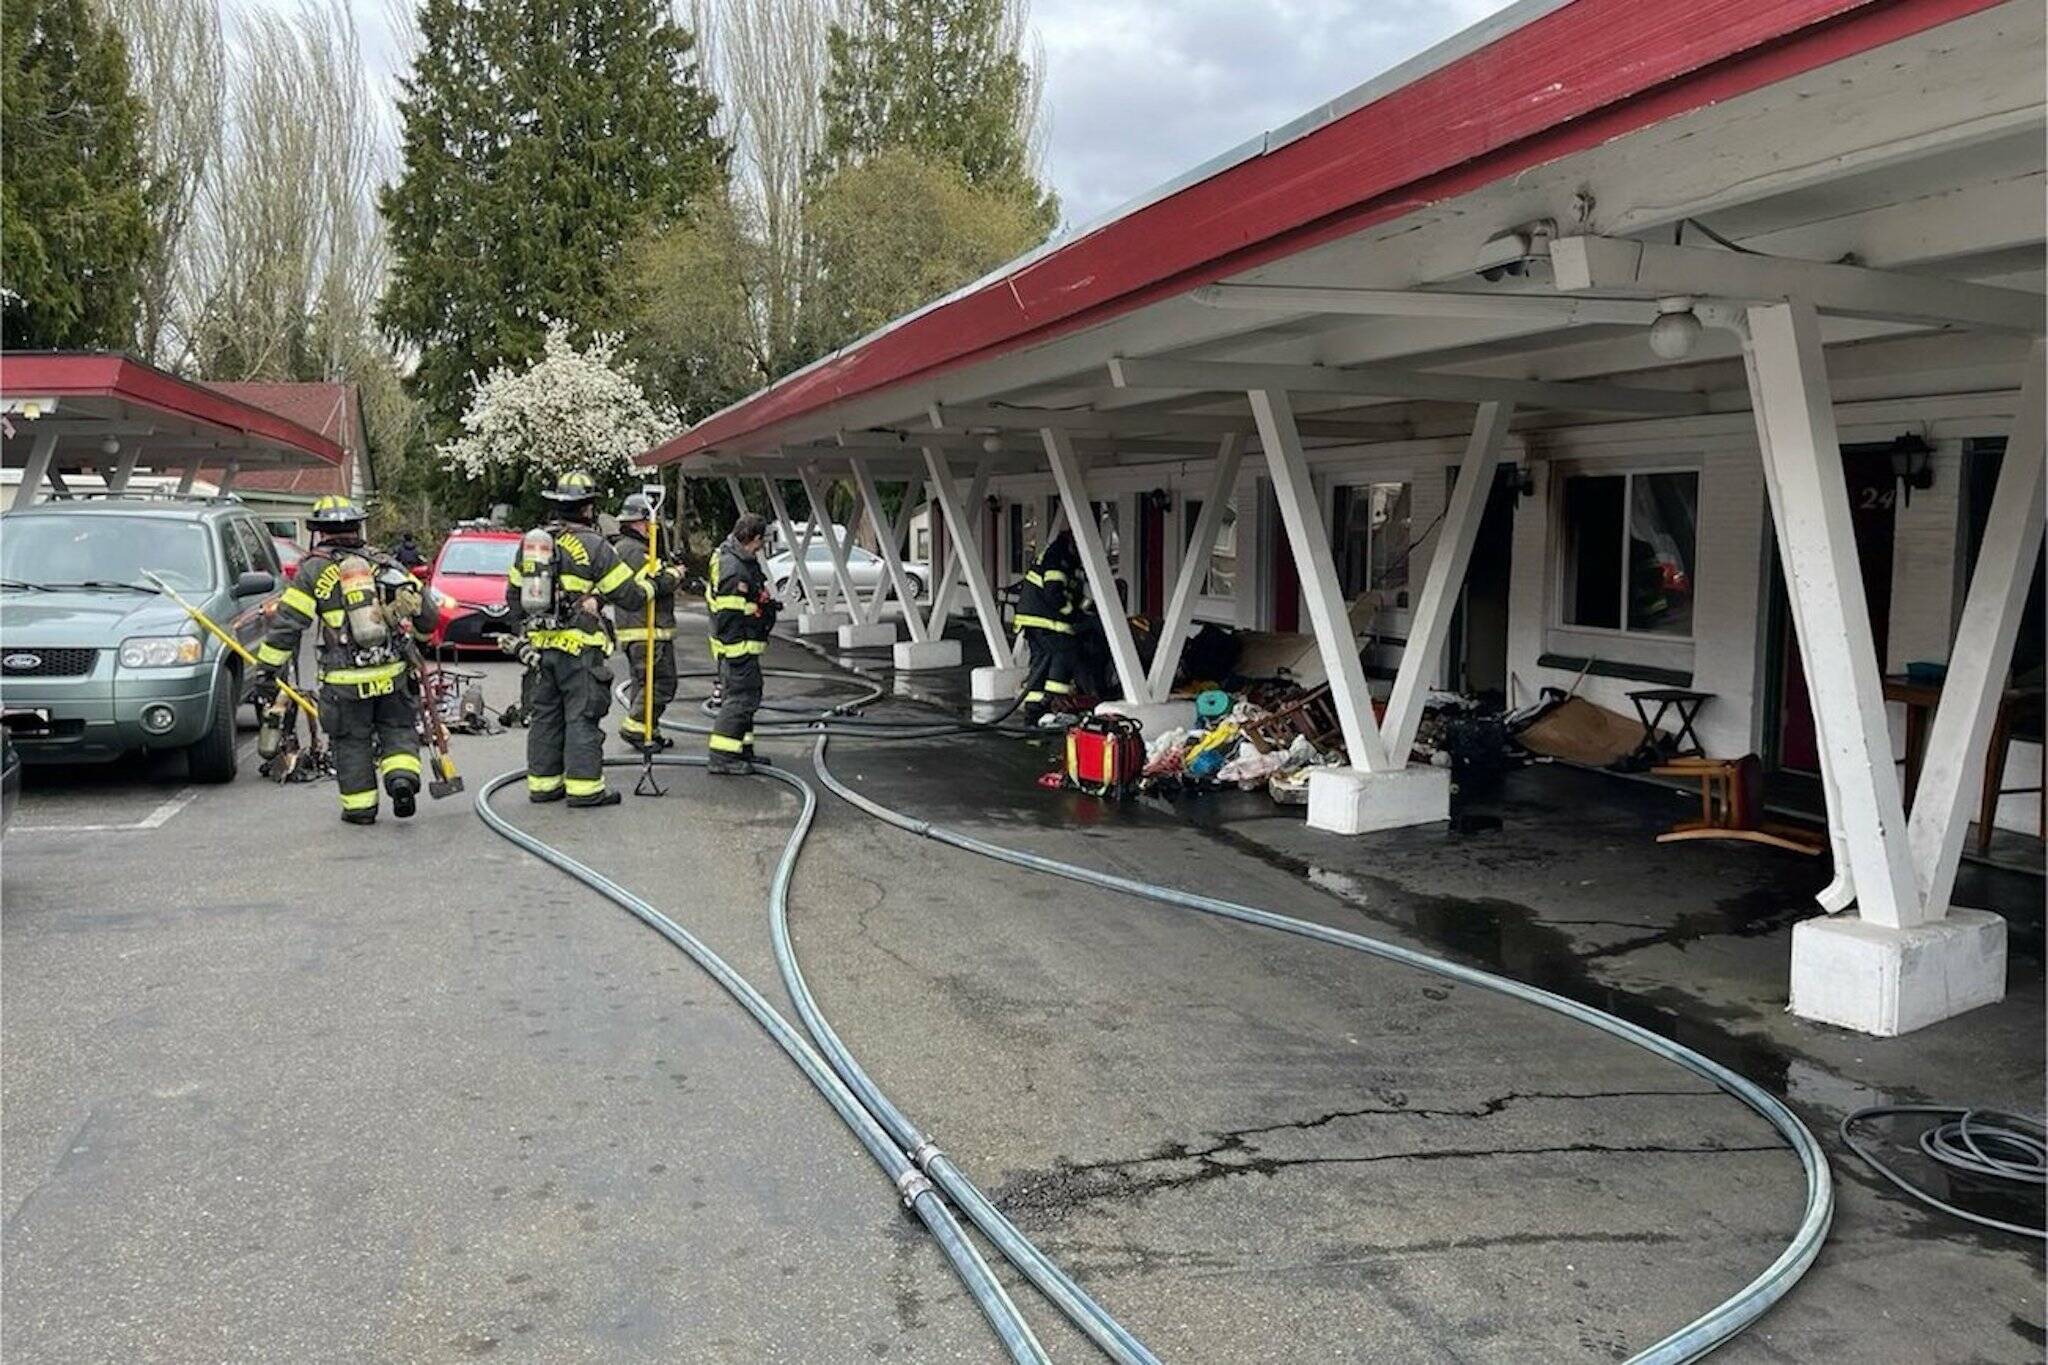 Firefighters extinguished a fire that displaced 5 people Monday at the St. Frances Motel in Edmonds. (Photo provided by South County Fire)